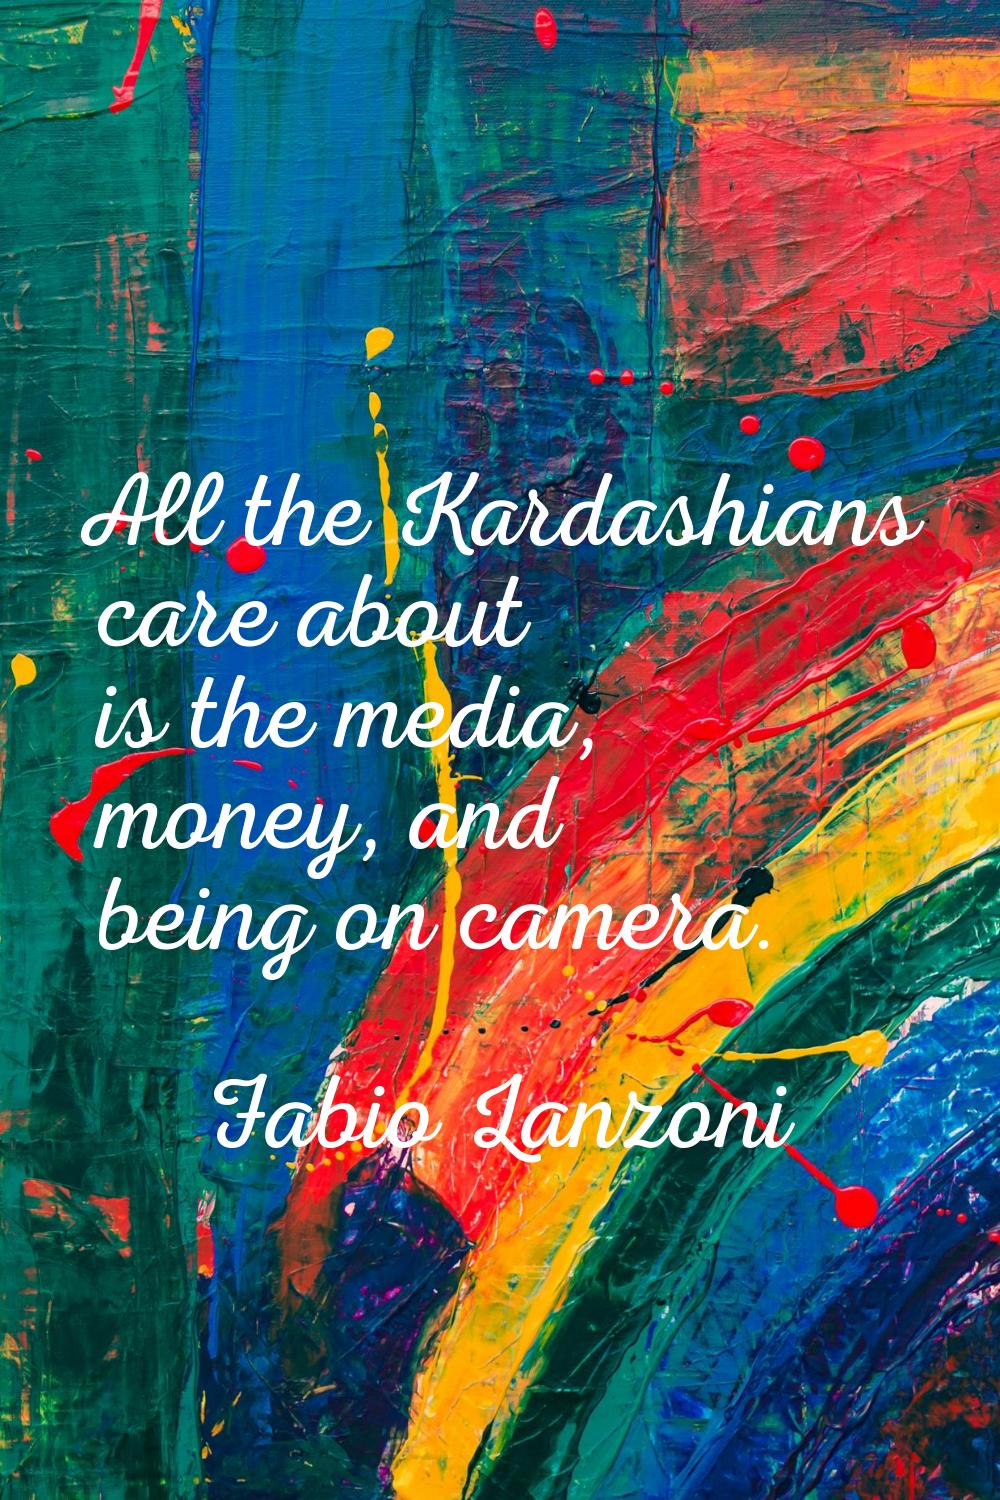 All the Kardashians care about is the media, money, and being on camera.